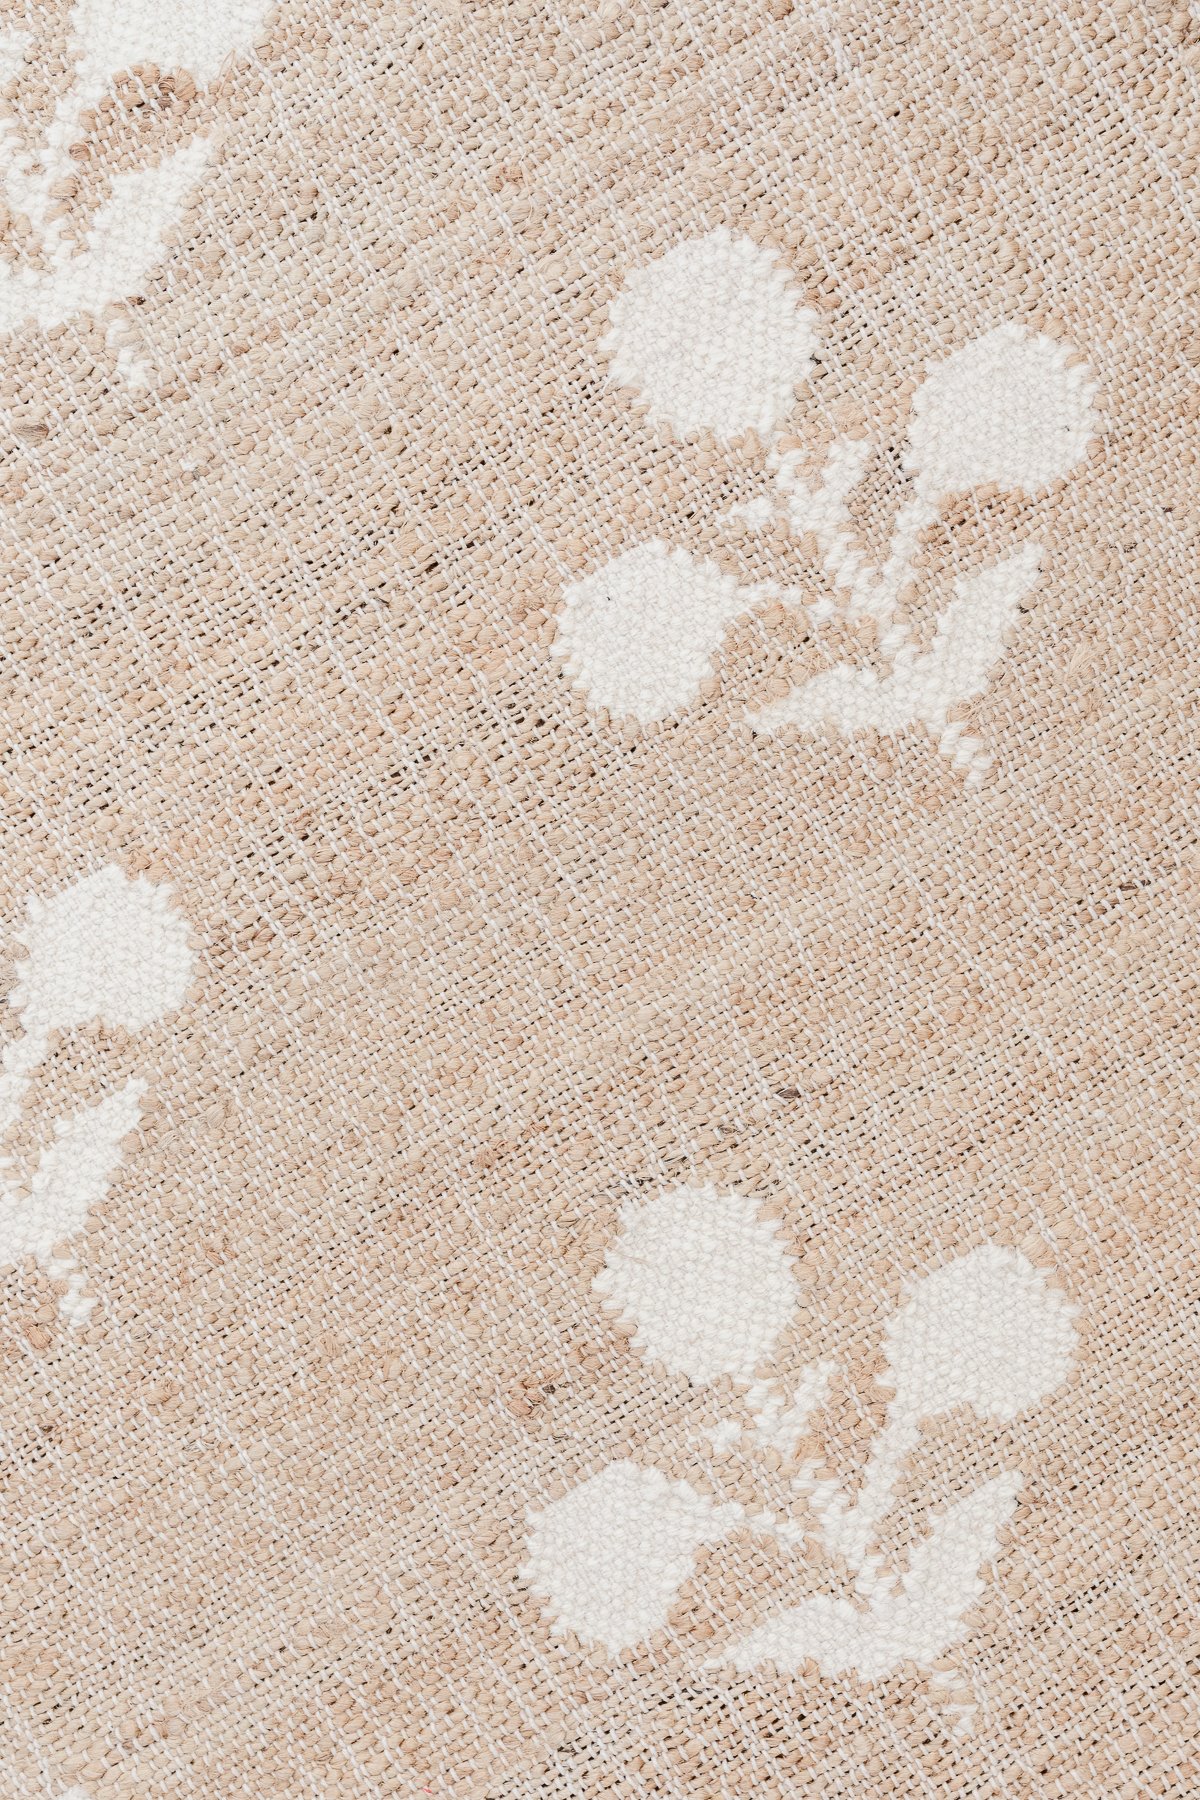 A close up of a beige fabric with white flowers on it, ideal for neutral rugs.